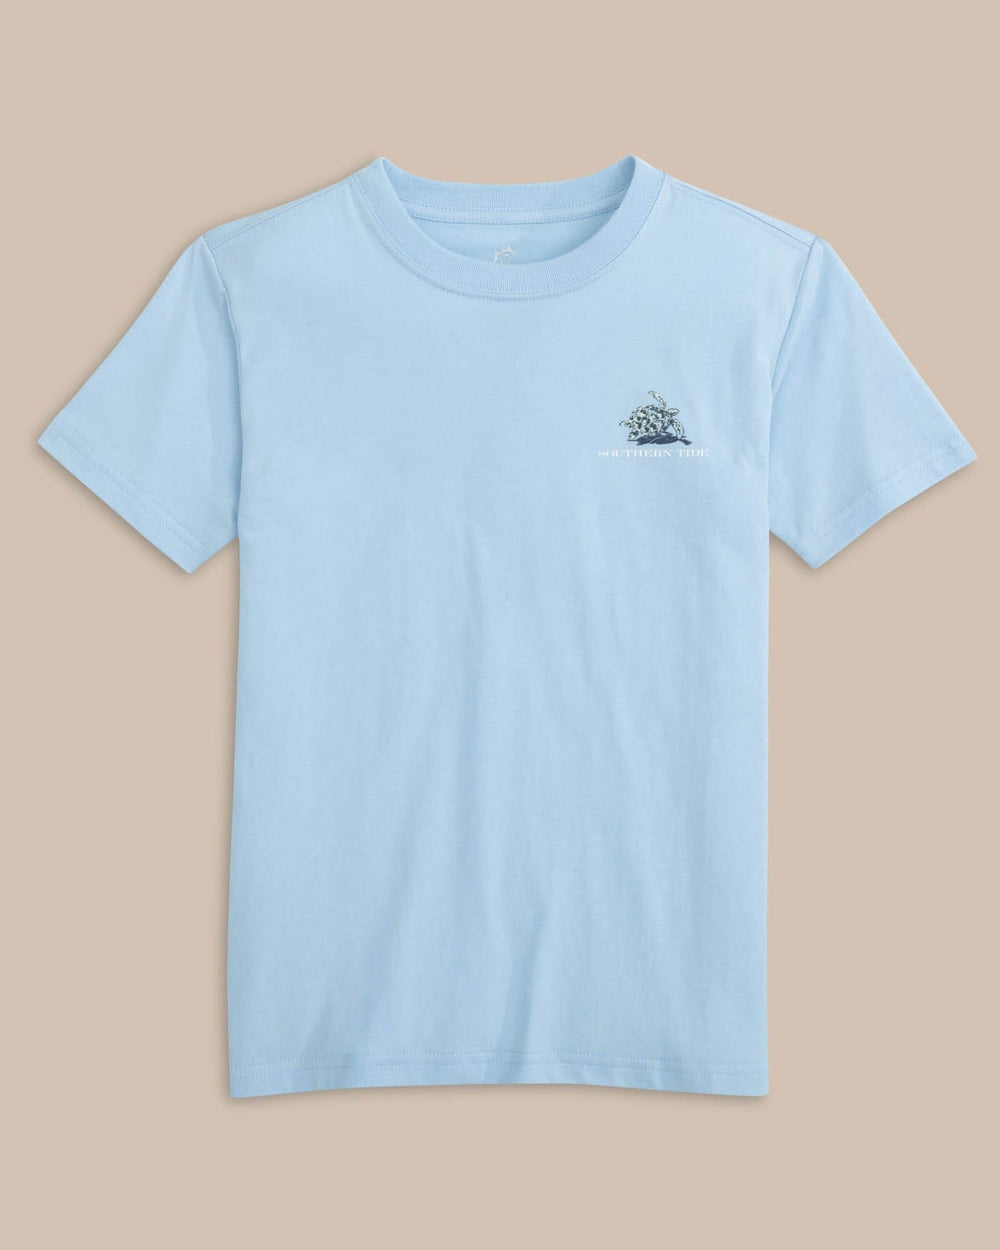 The front view of the Southern Tide Youth Yachts of Turtles Short Sleeve T-shirt by Southern Tide - Clearwater Blue